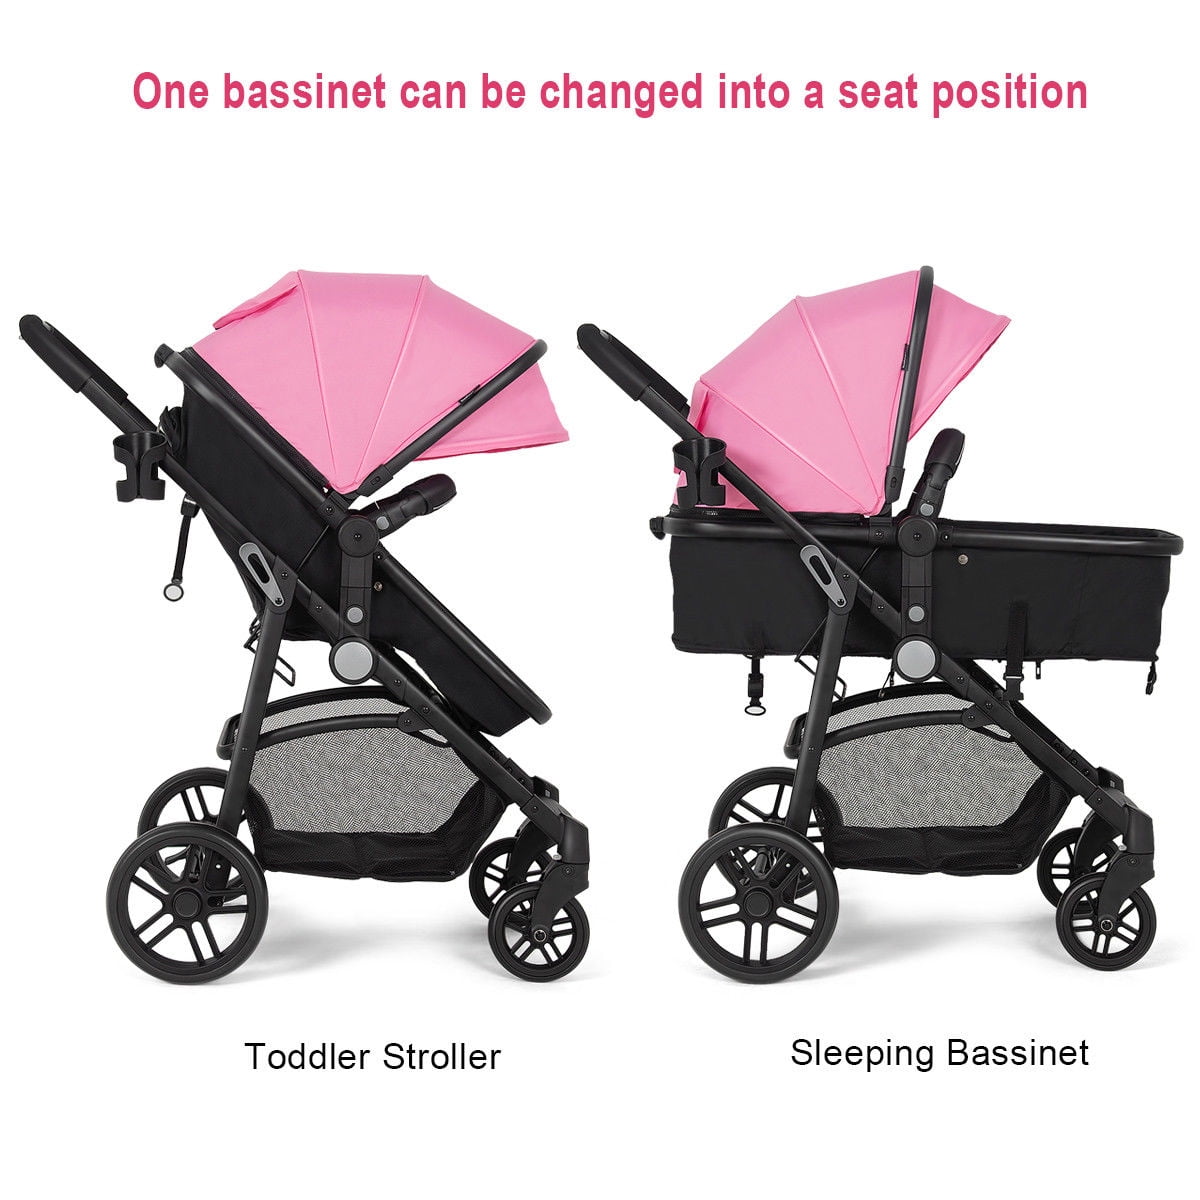 2 in 1 Convertible Carriage Bassinet to Stroller Pushchair with Foot Cover Deluxe Black 5-Point Harness Costzon Baby Stroller Large Storage Space Wheels Suspension Cup Holder 